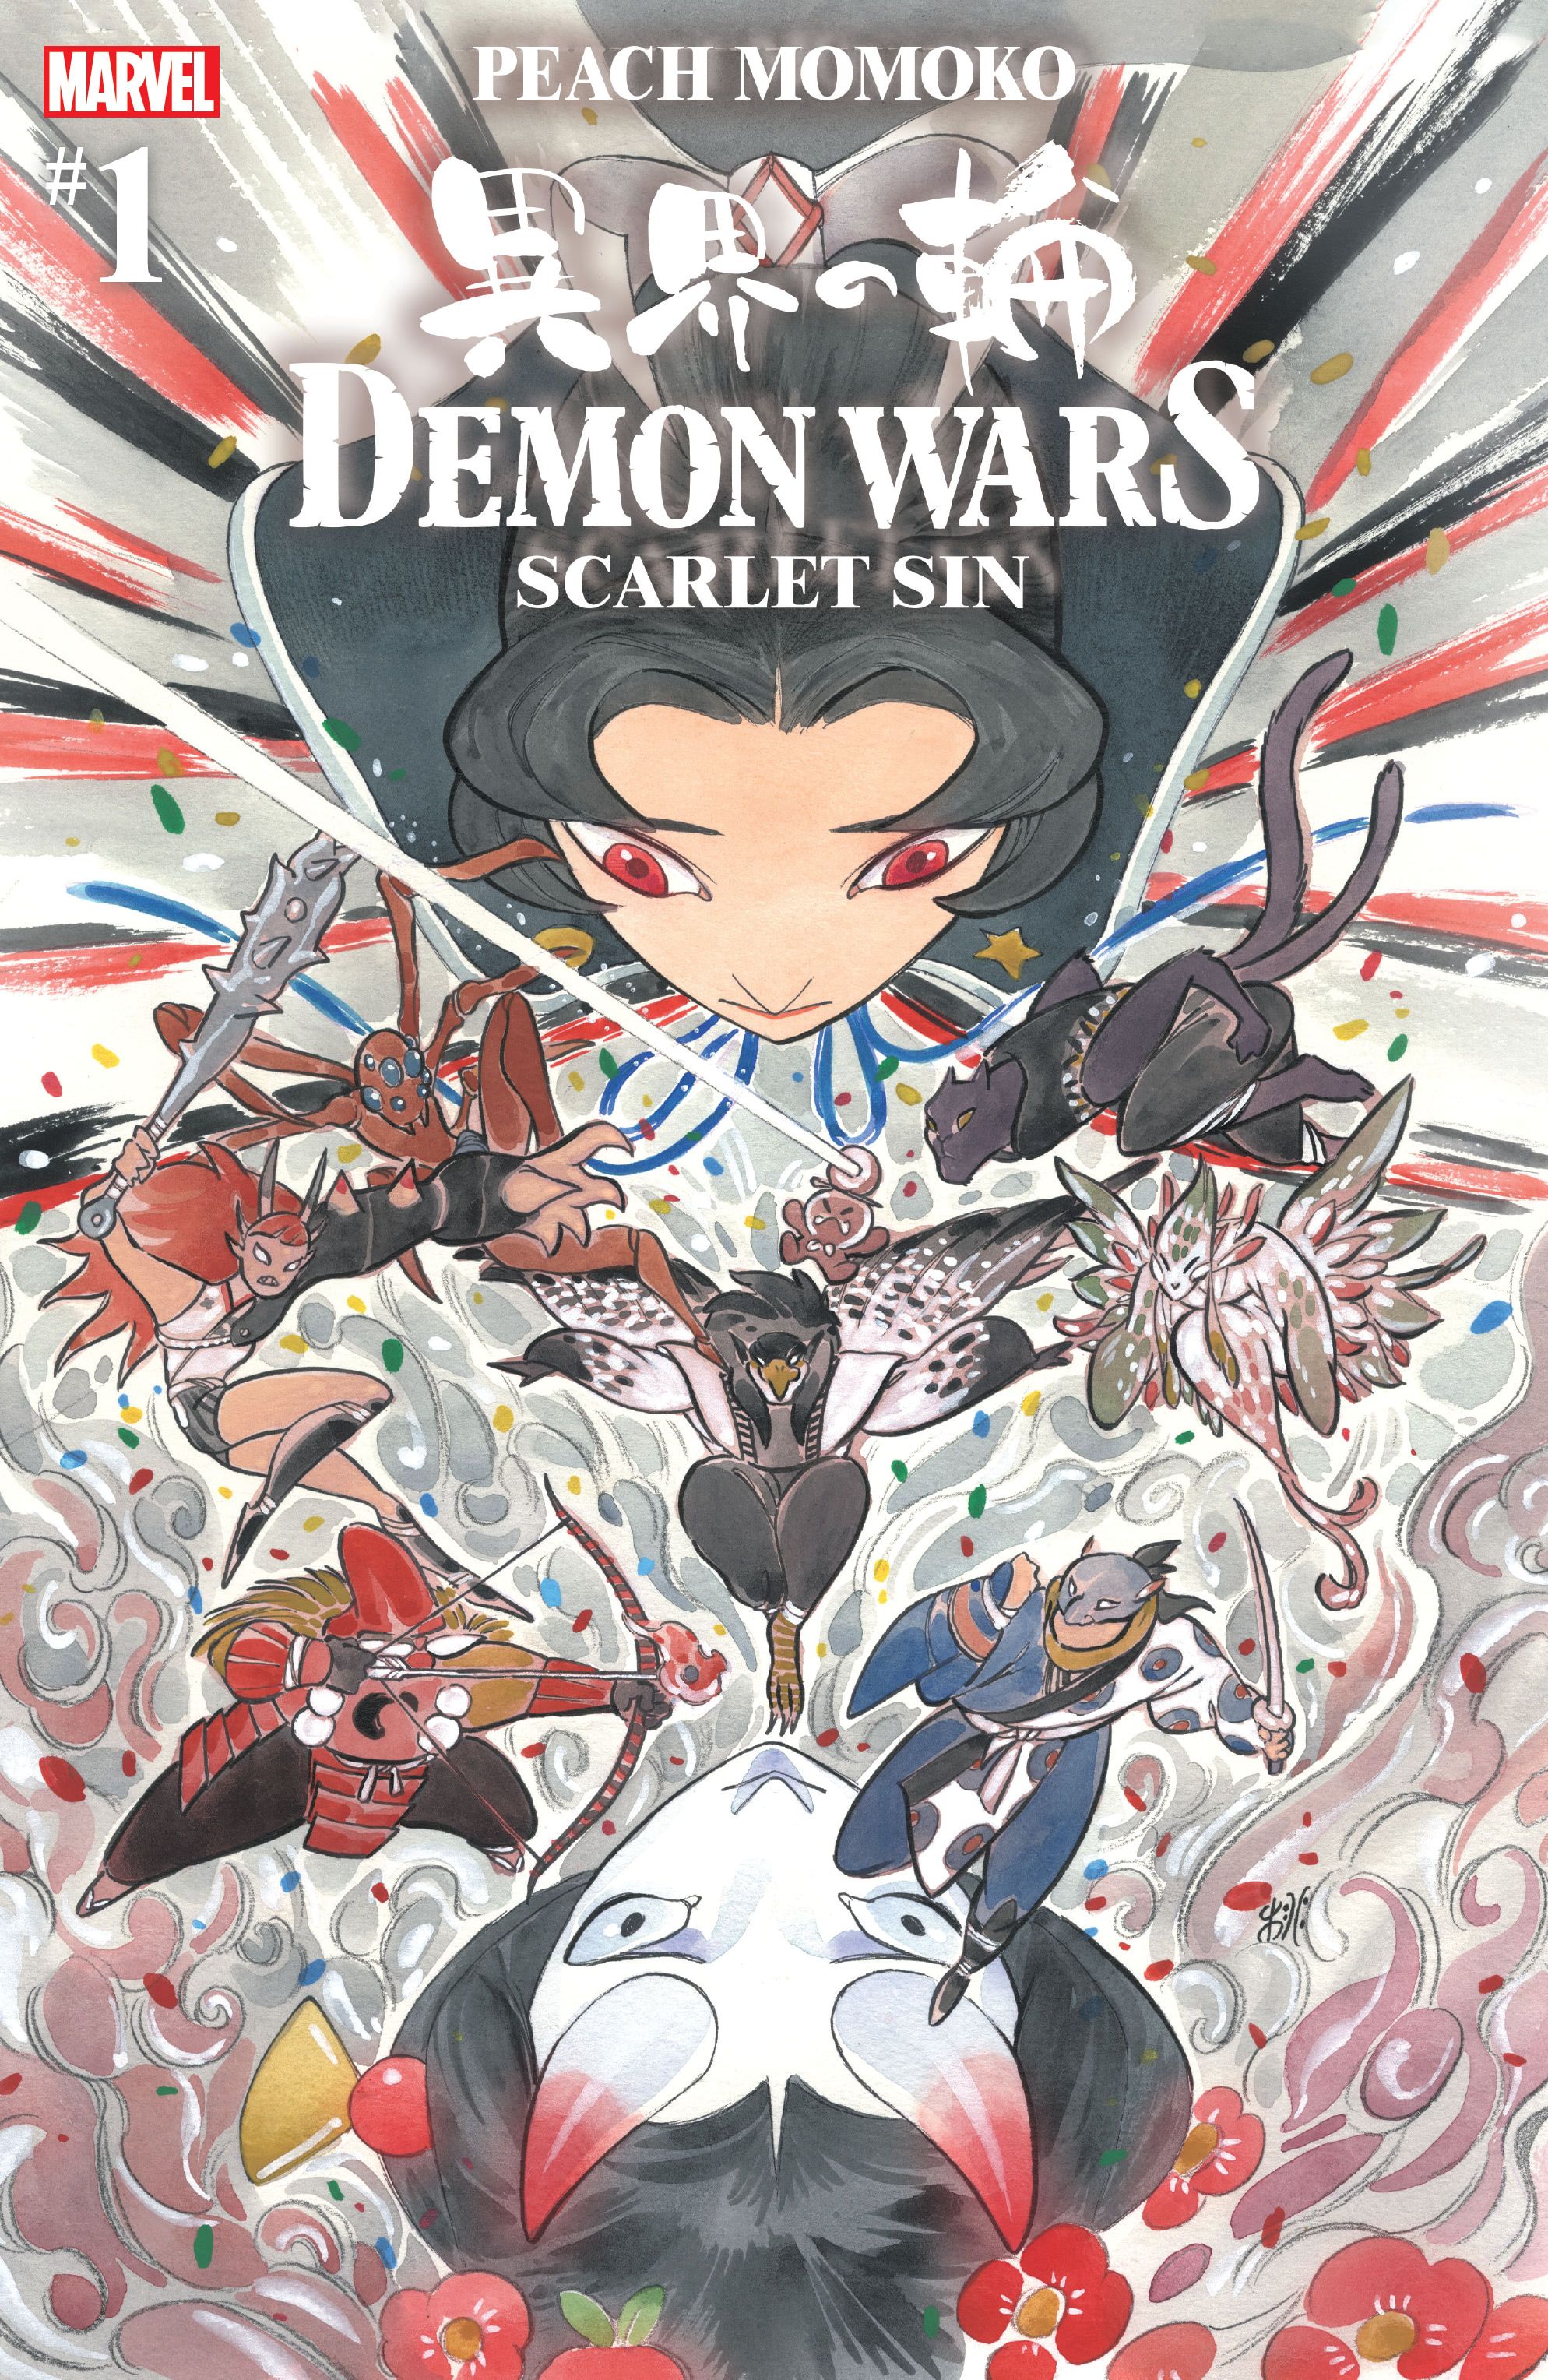 Cover A of Demon Wars Scarlet Sin #1 with Mariko surrounded by samurai and a demon version of herself. 